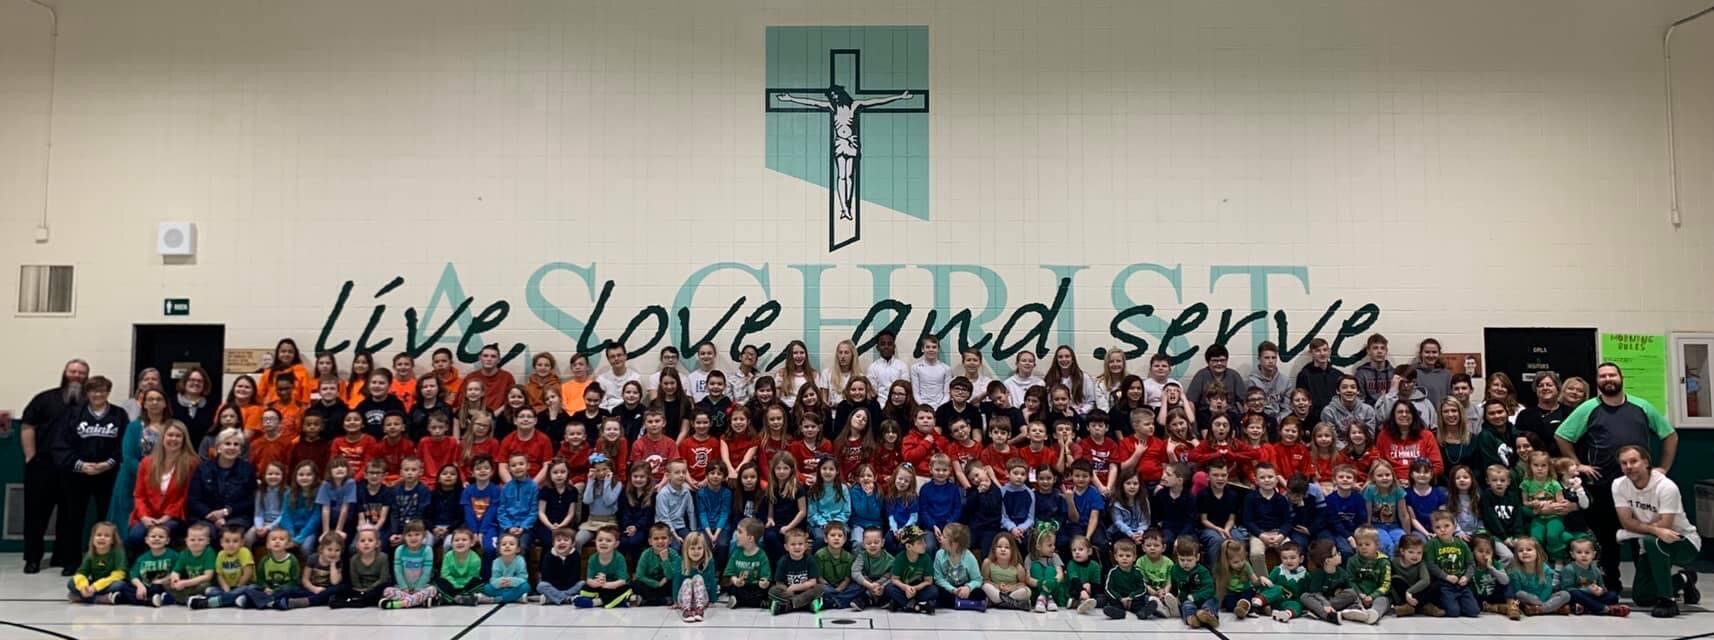 St. Thomas Philo Group Picture.JPG